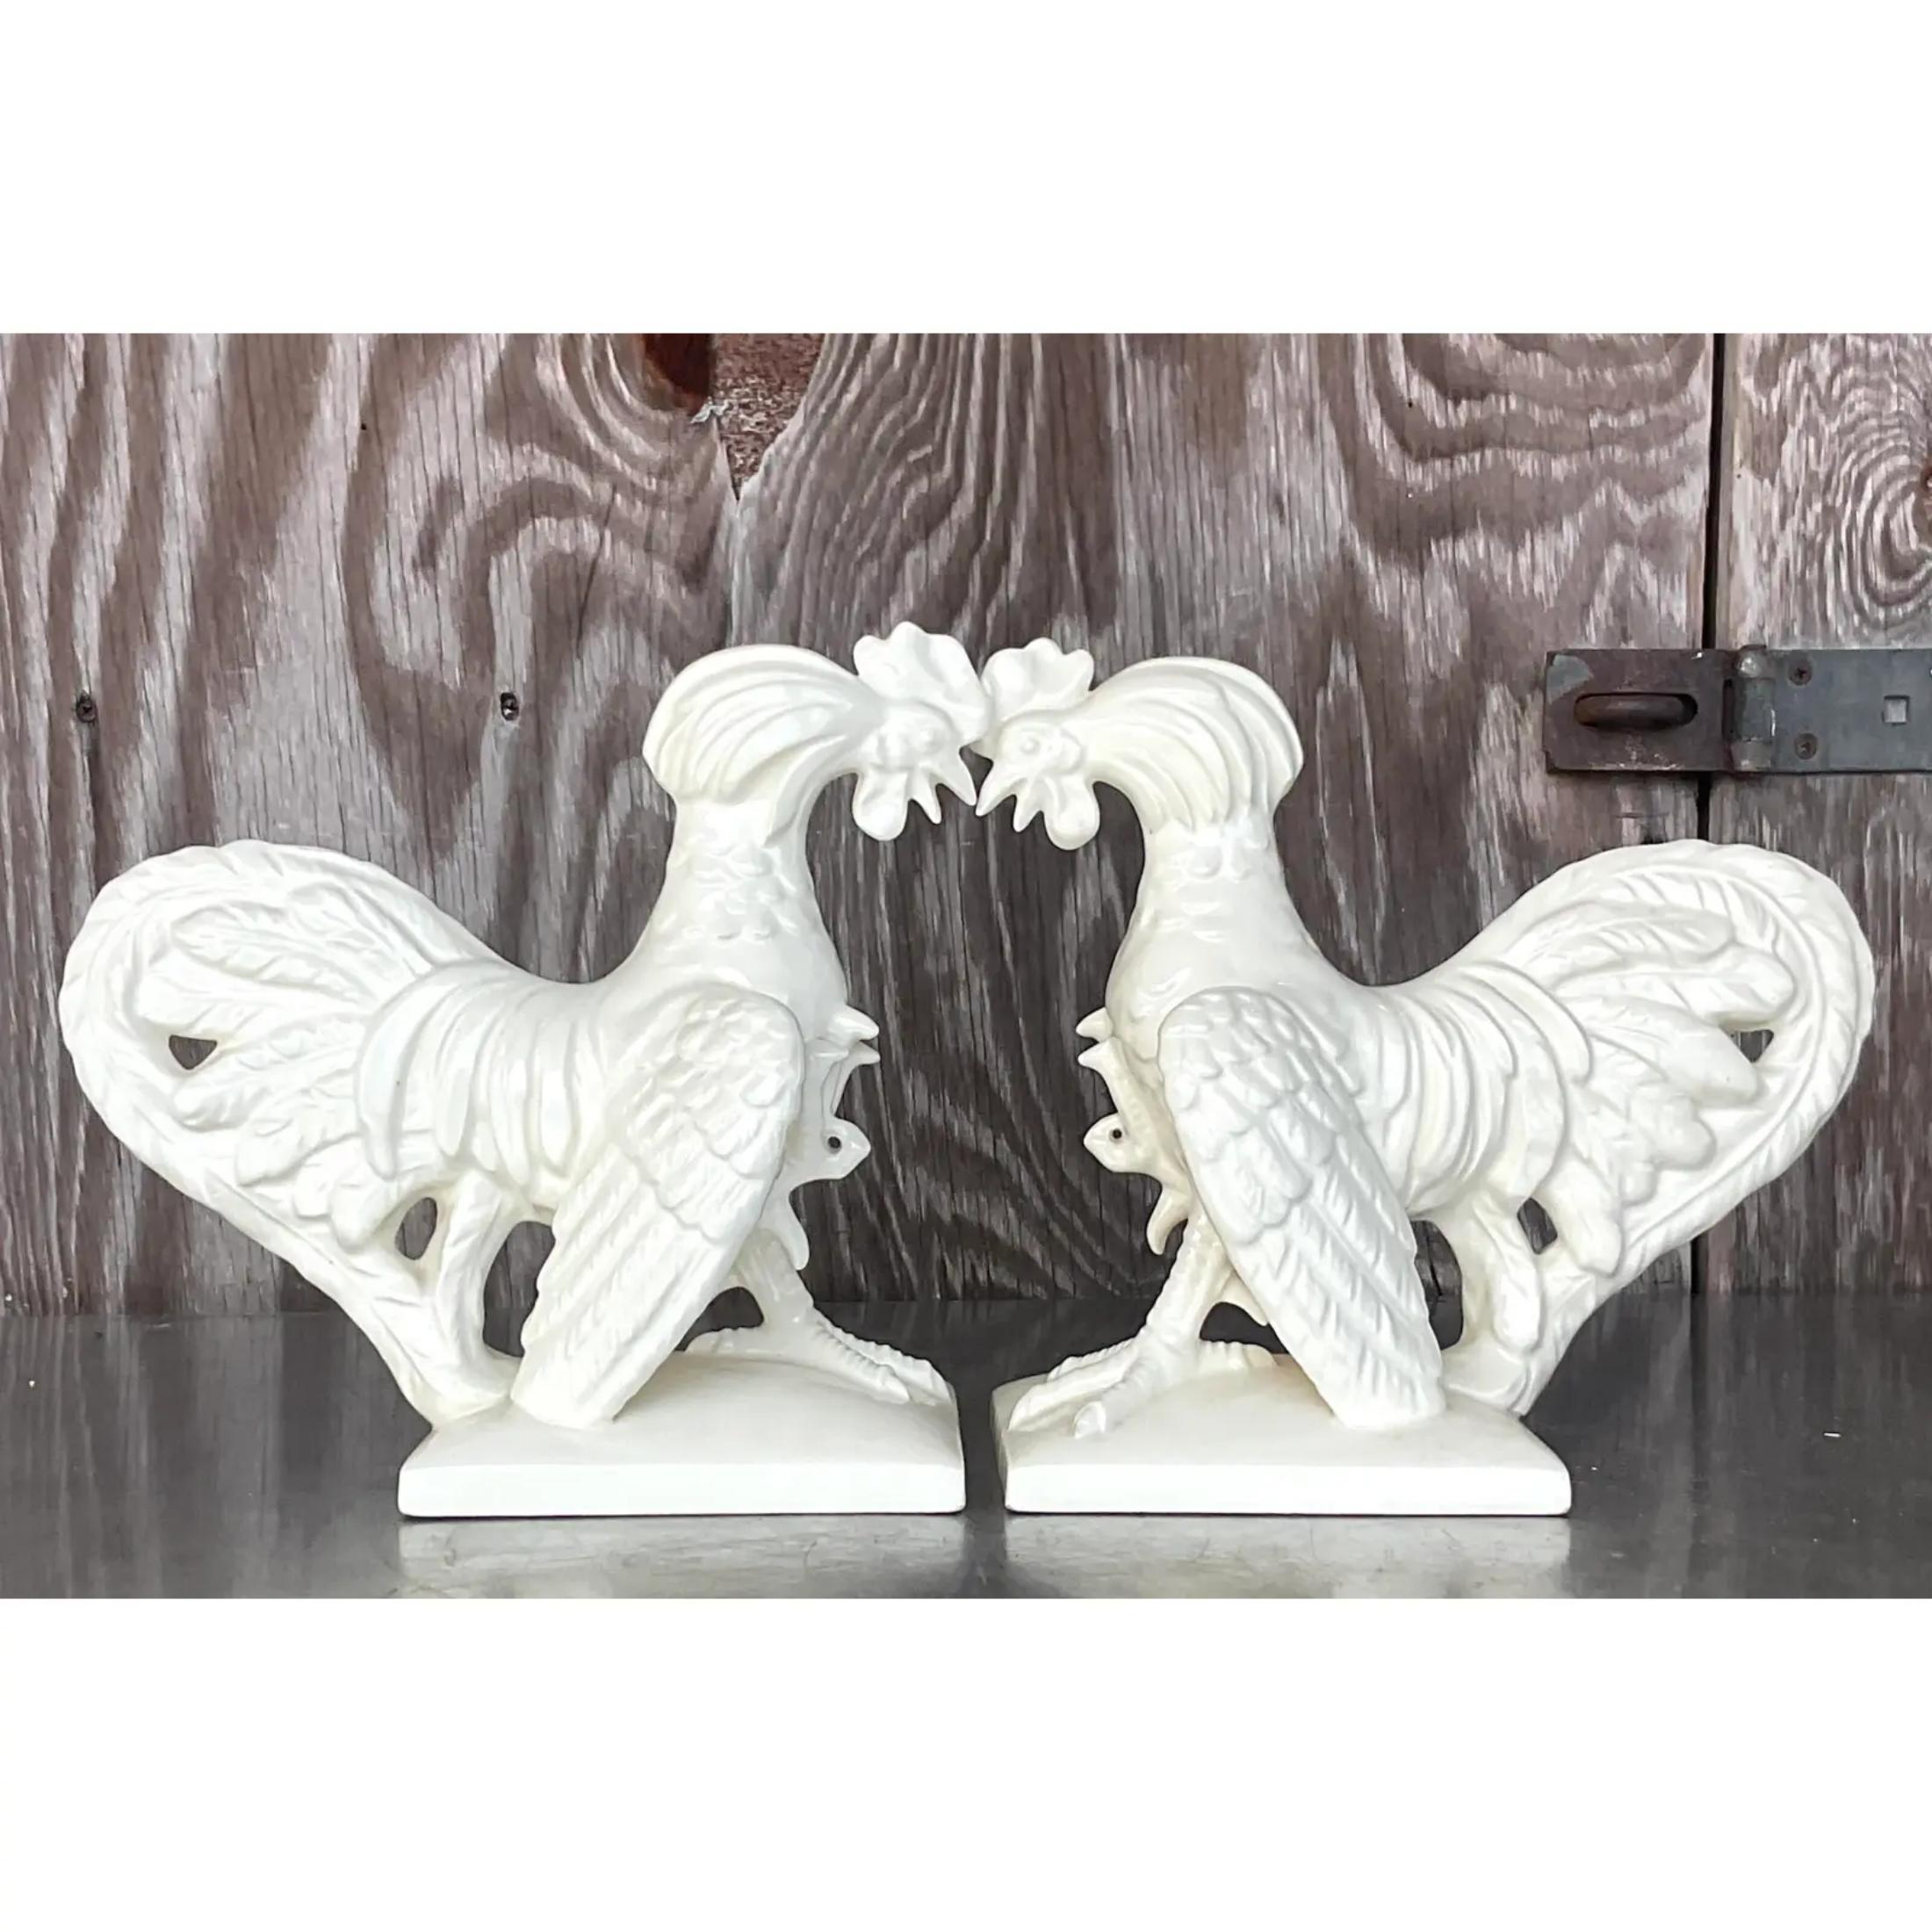 A fabulous pair of vintage Boho roosters. A chic glazed ceramic finish on a fantastic post. Add a little high energy to your space. Signed on the bottom. Acquired from a Palm Beach estate.